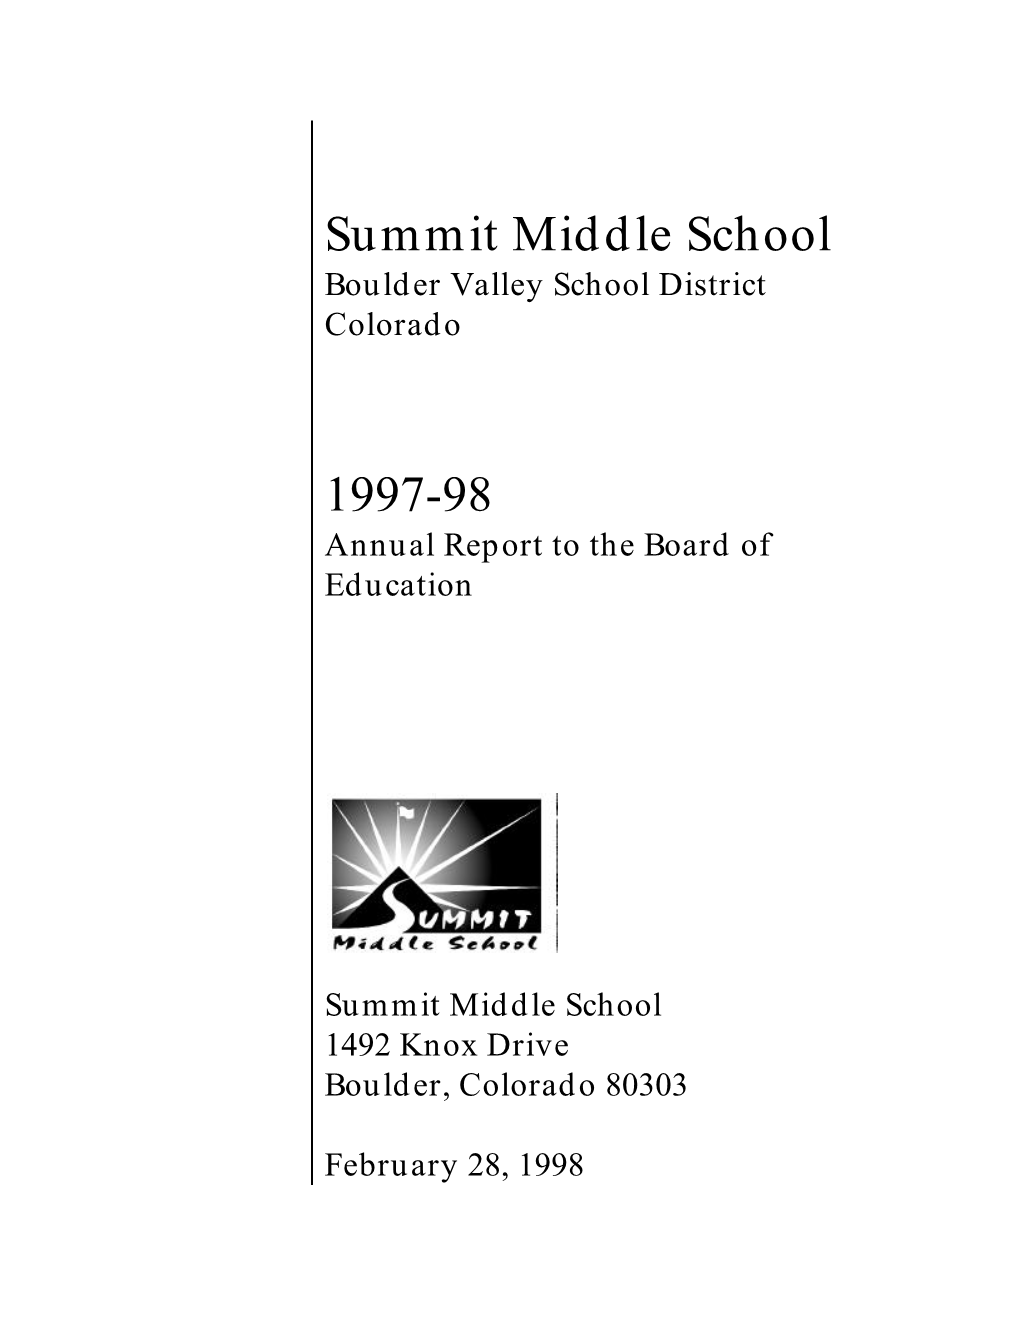 Summit Middle School Annual Report 1998